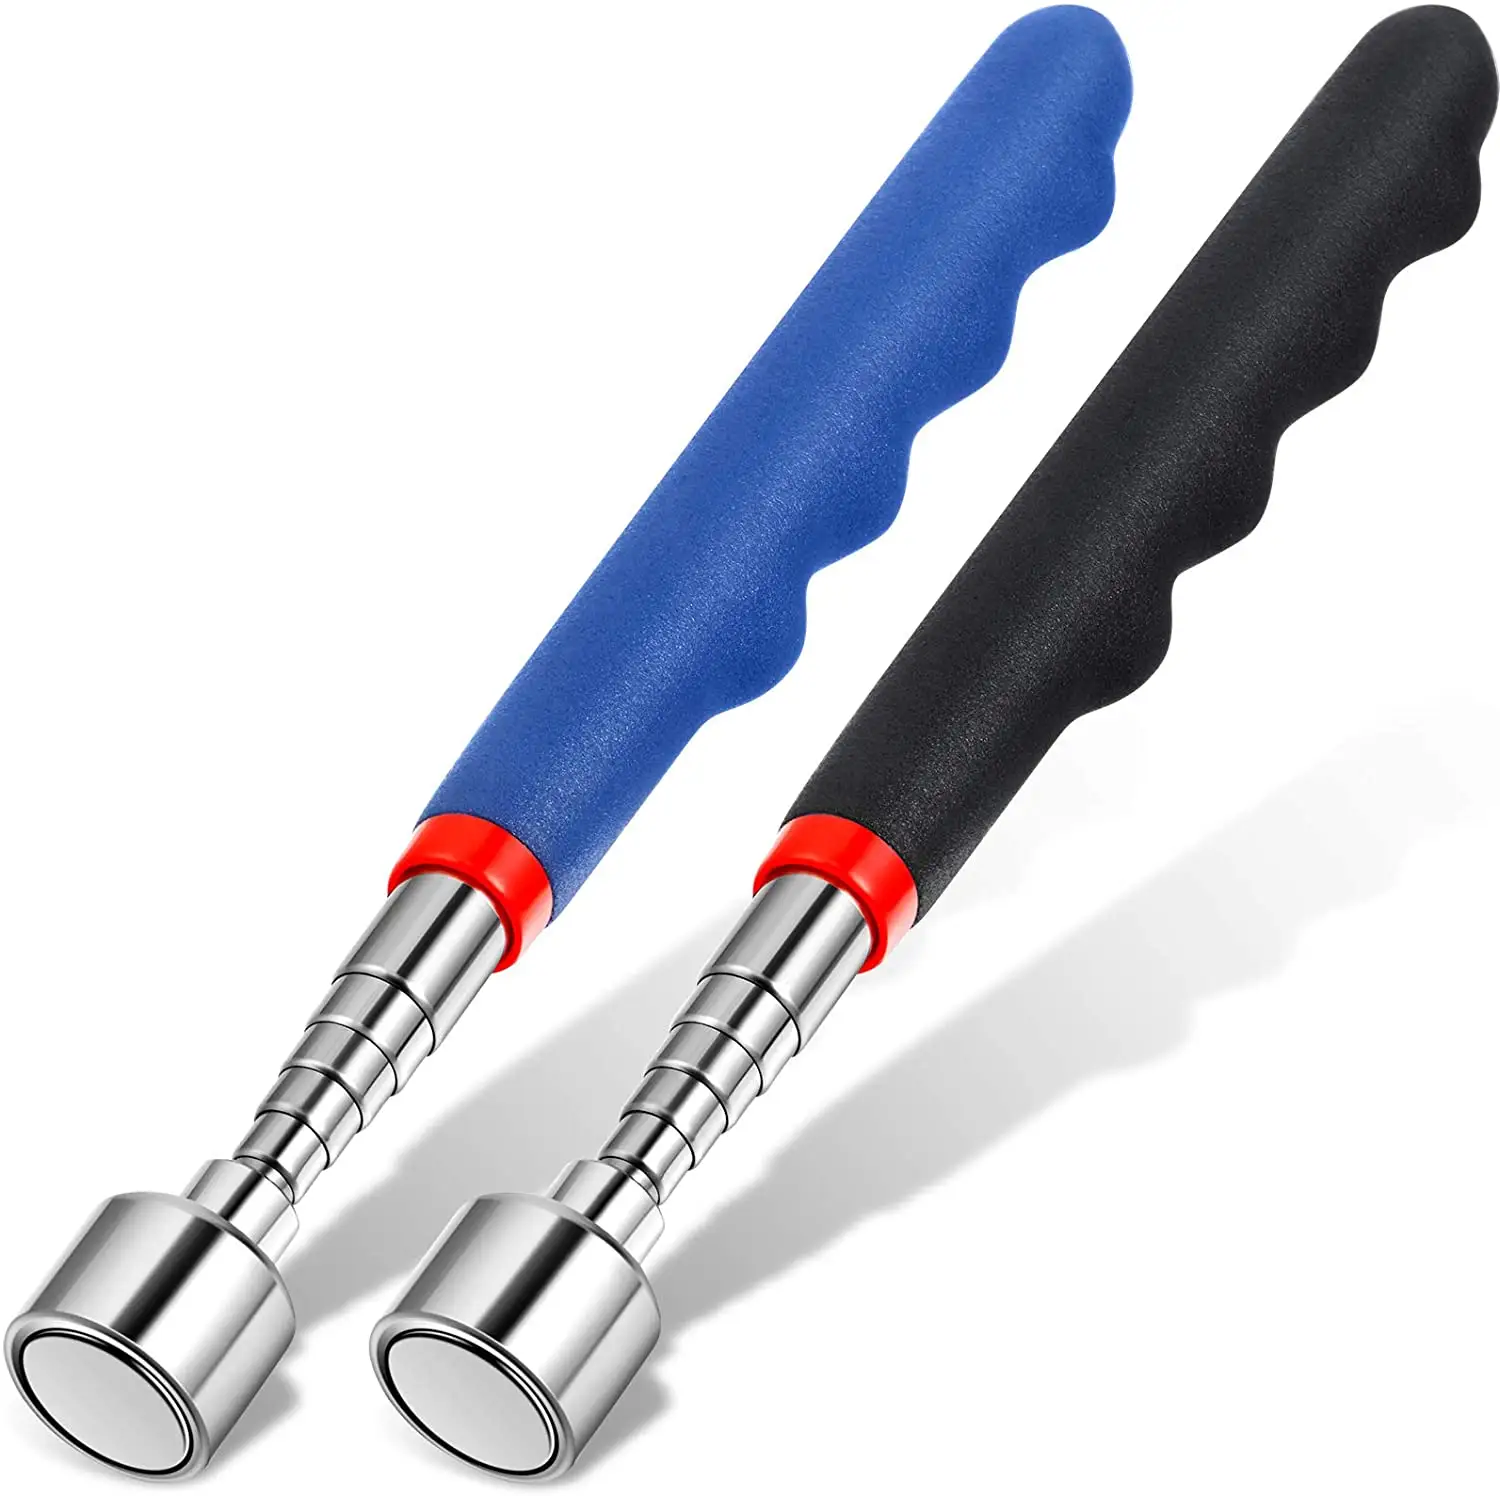 Good quality magnetic pickup tool - telescoping magnet stick telescopic magnetic pick-up tool